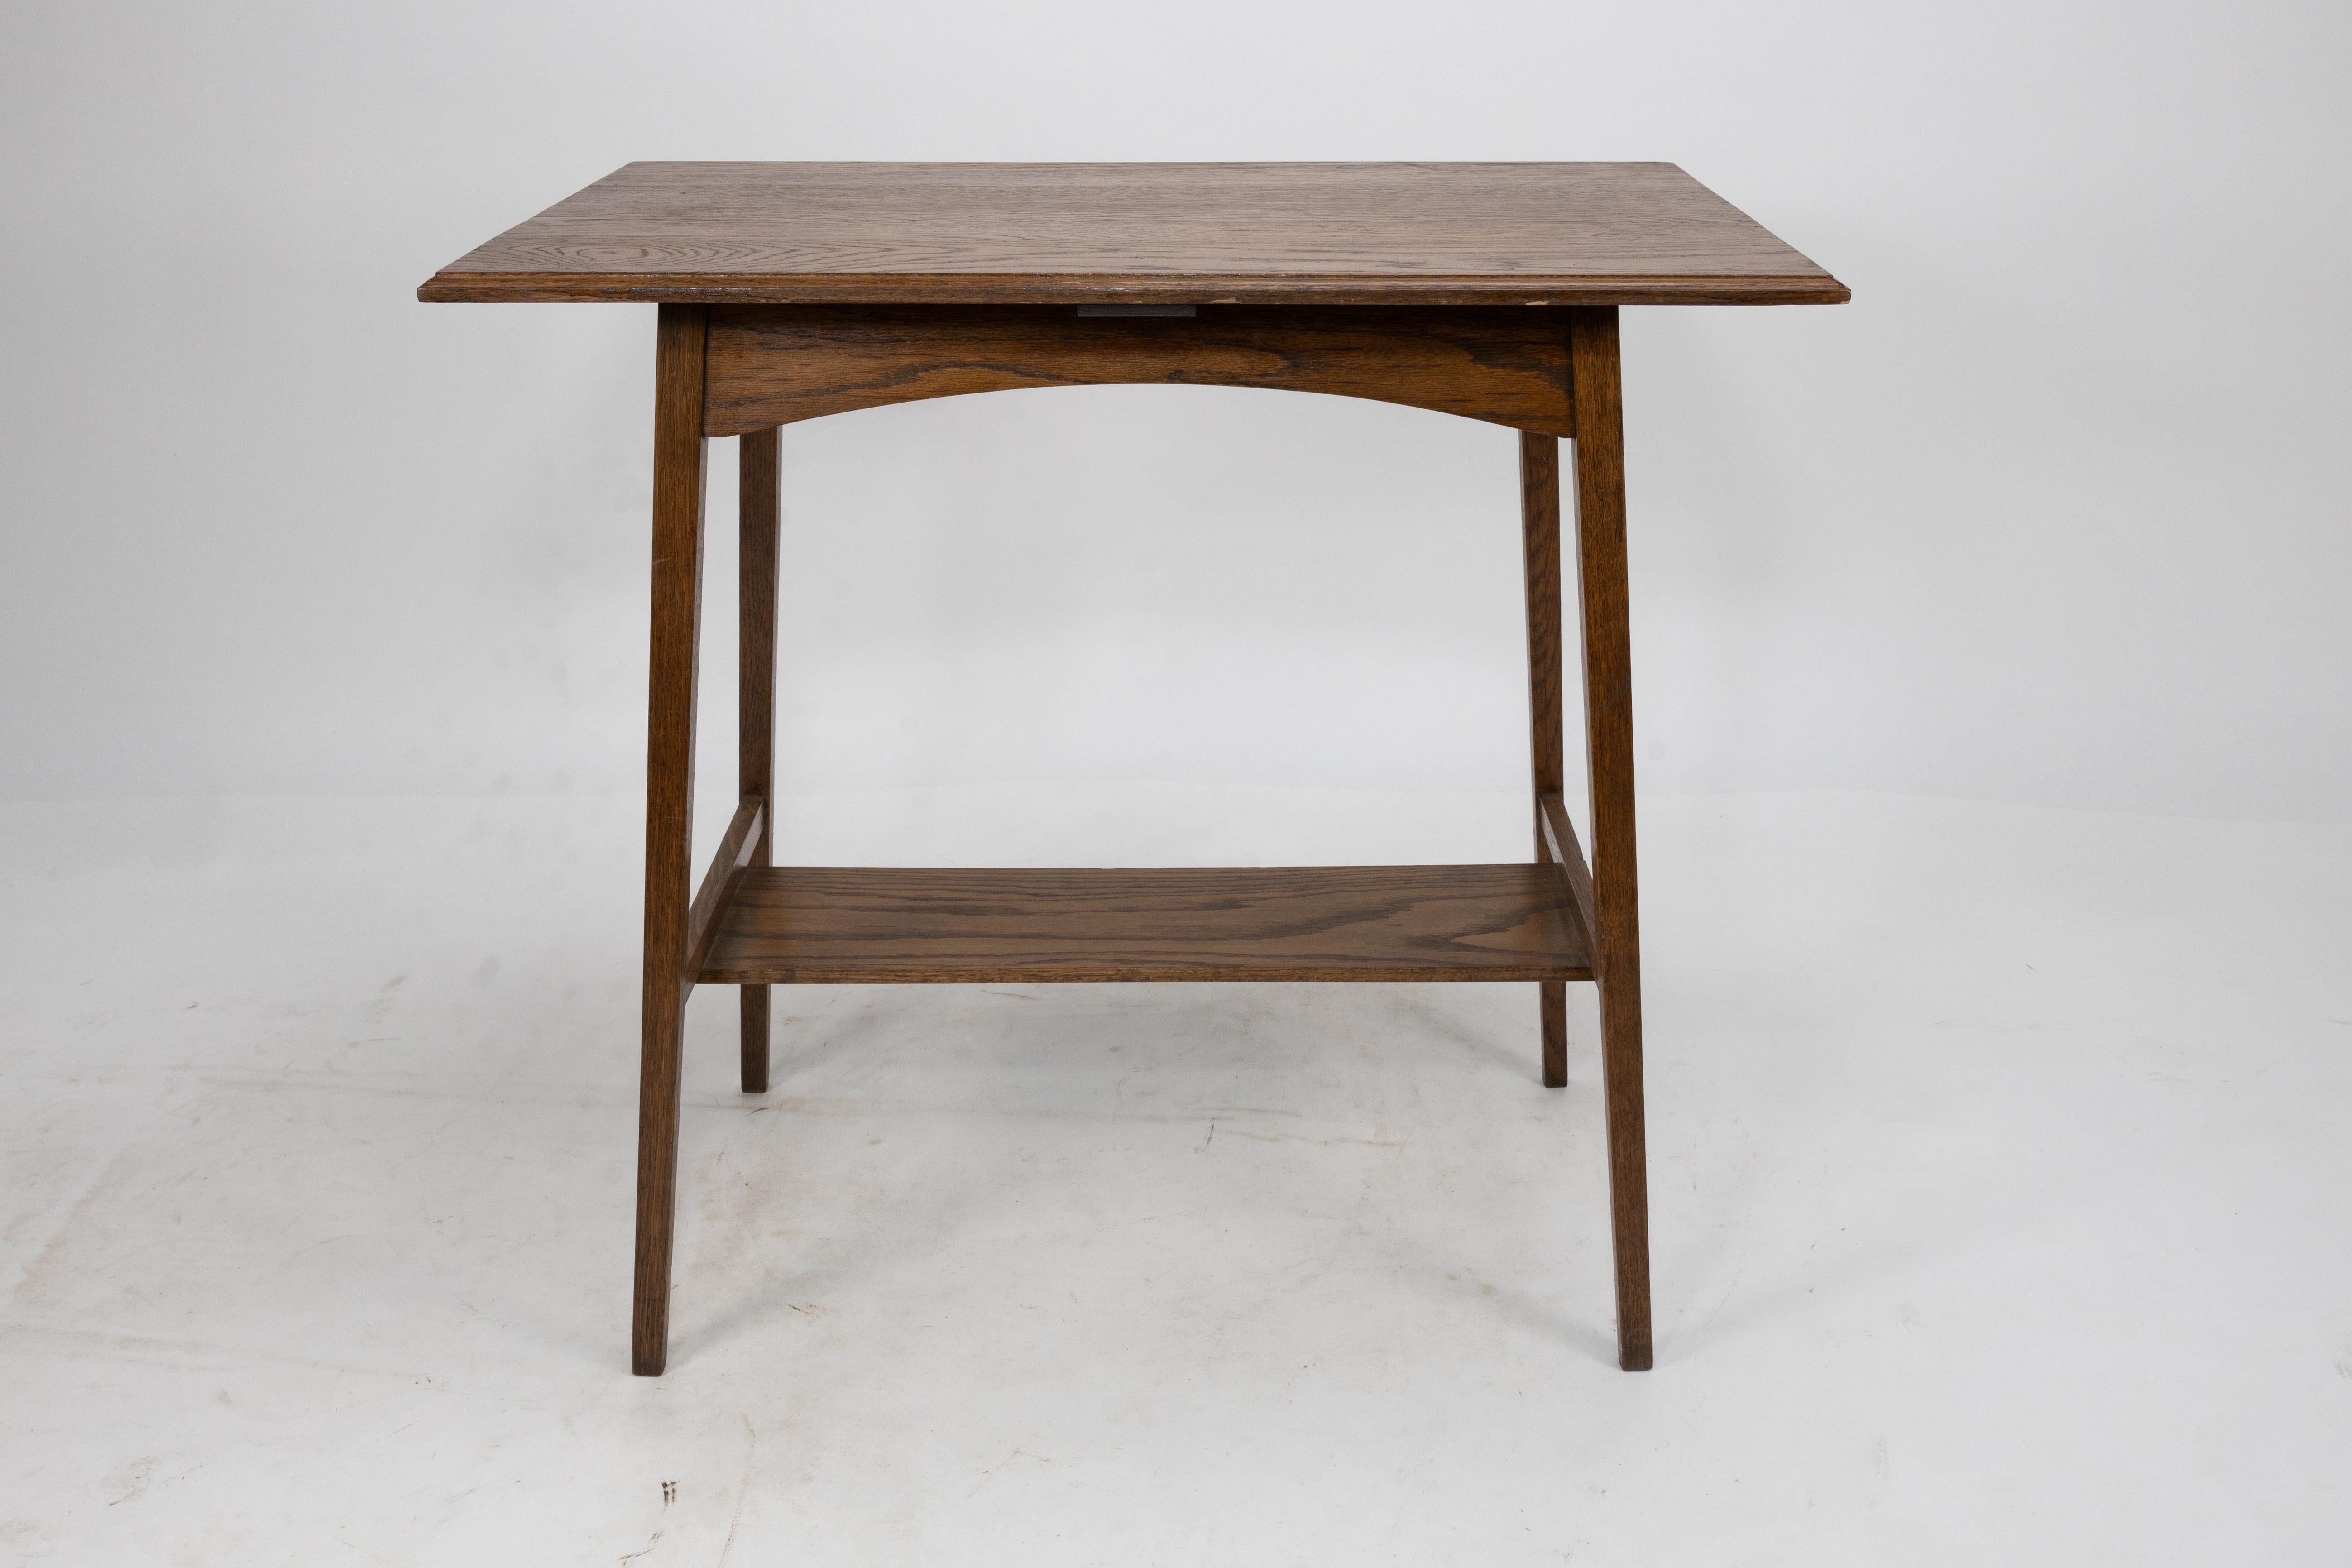 Waring and Gillow. A pair of Arts and Crafts side tables with oblong tops and curved aprons below stood on slender tapering legs united by stretchers and a lower shelf.